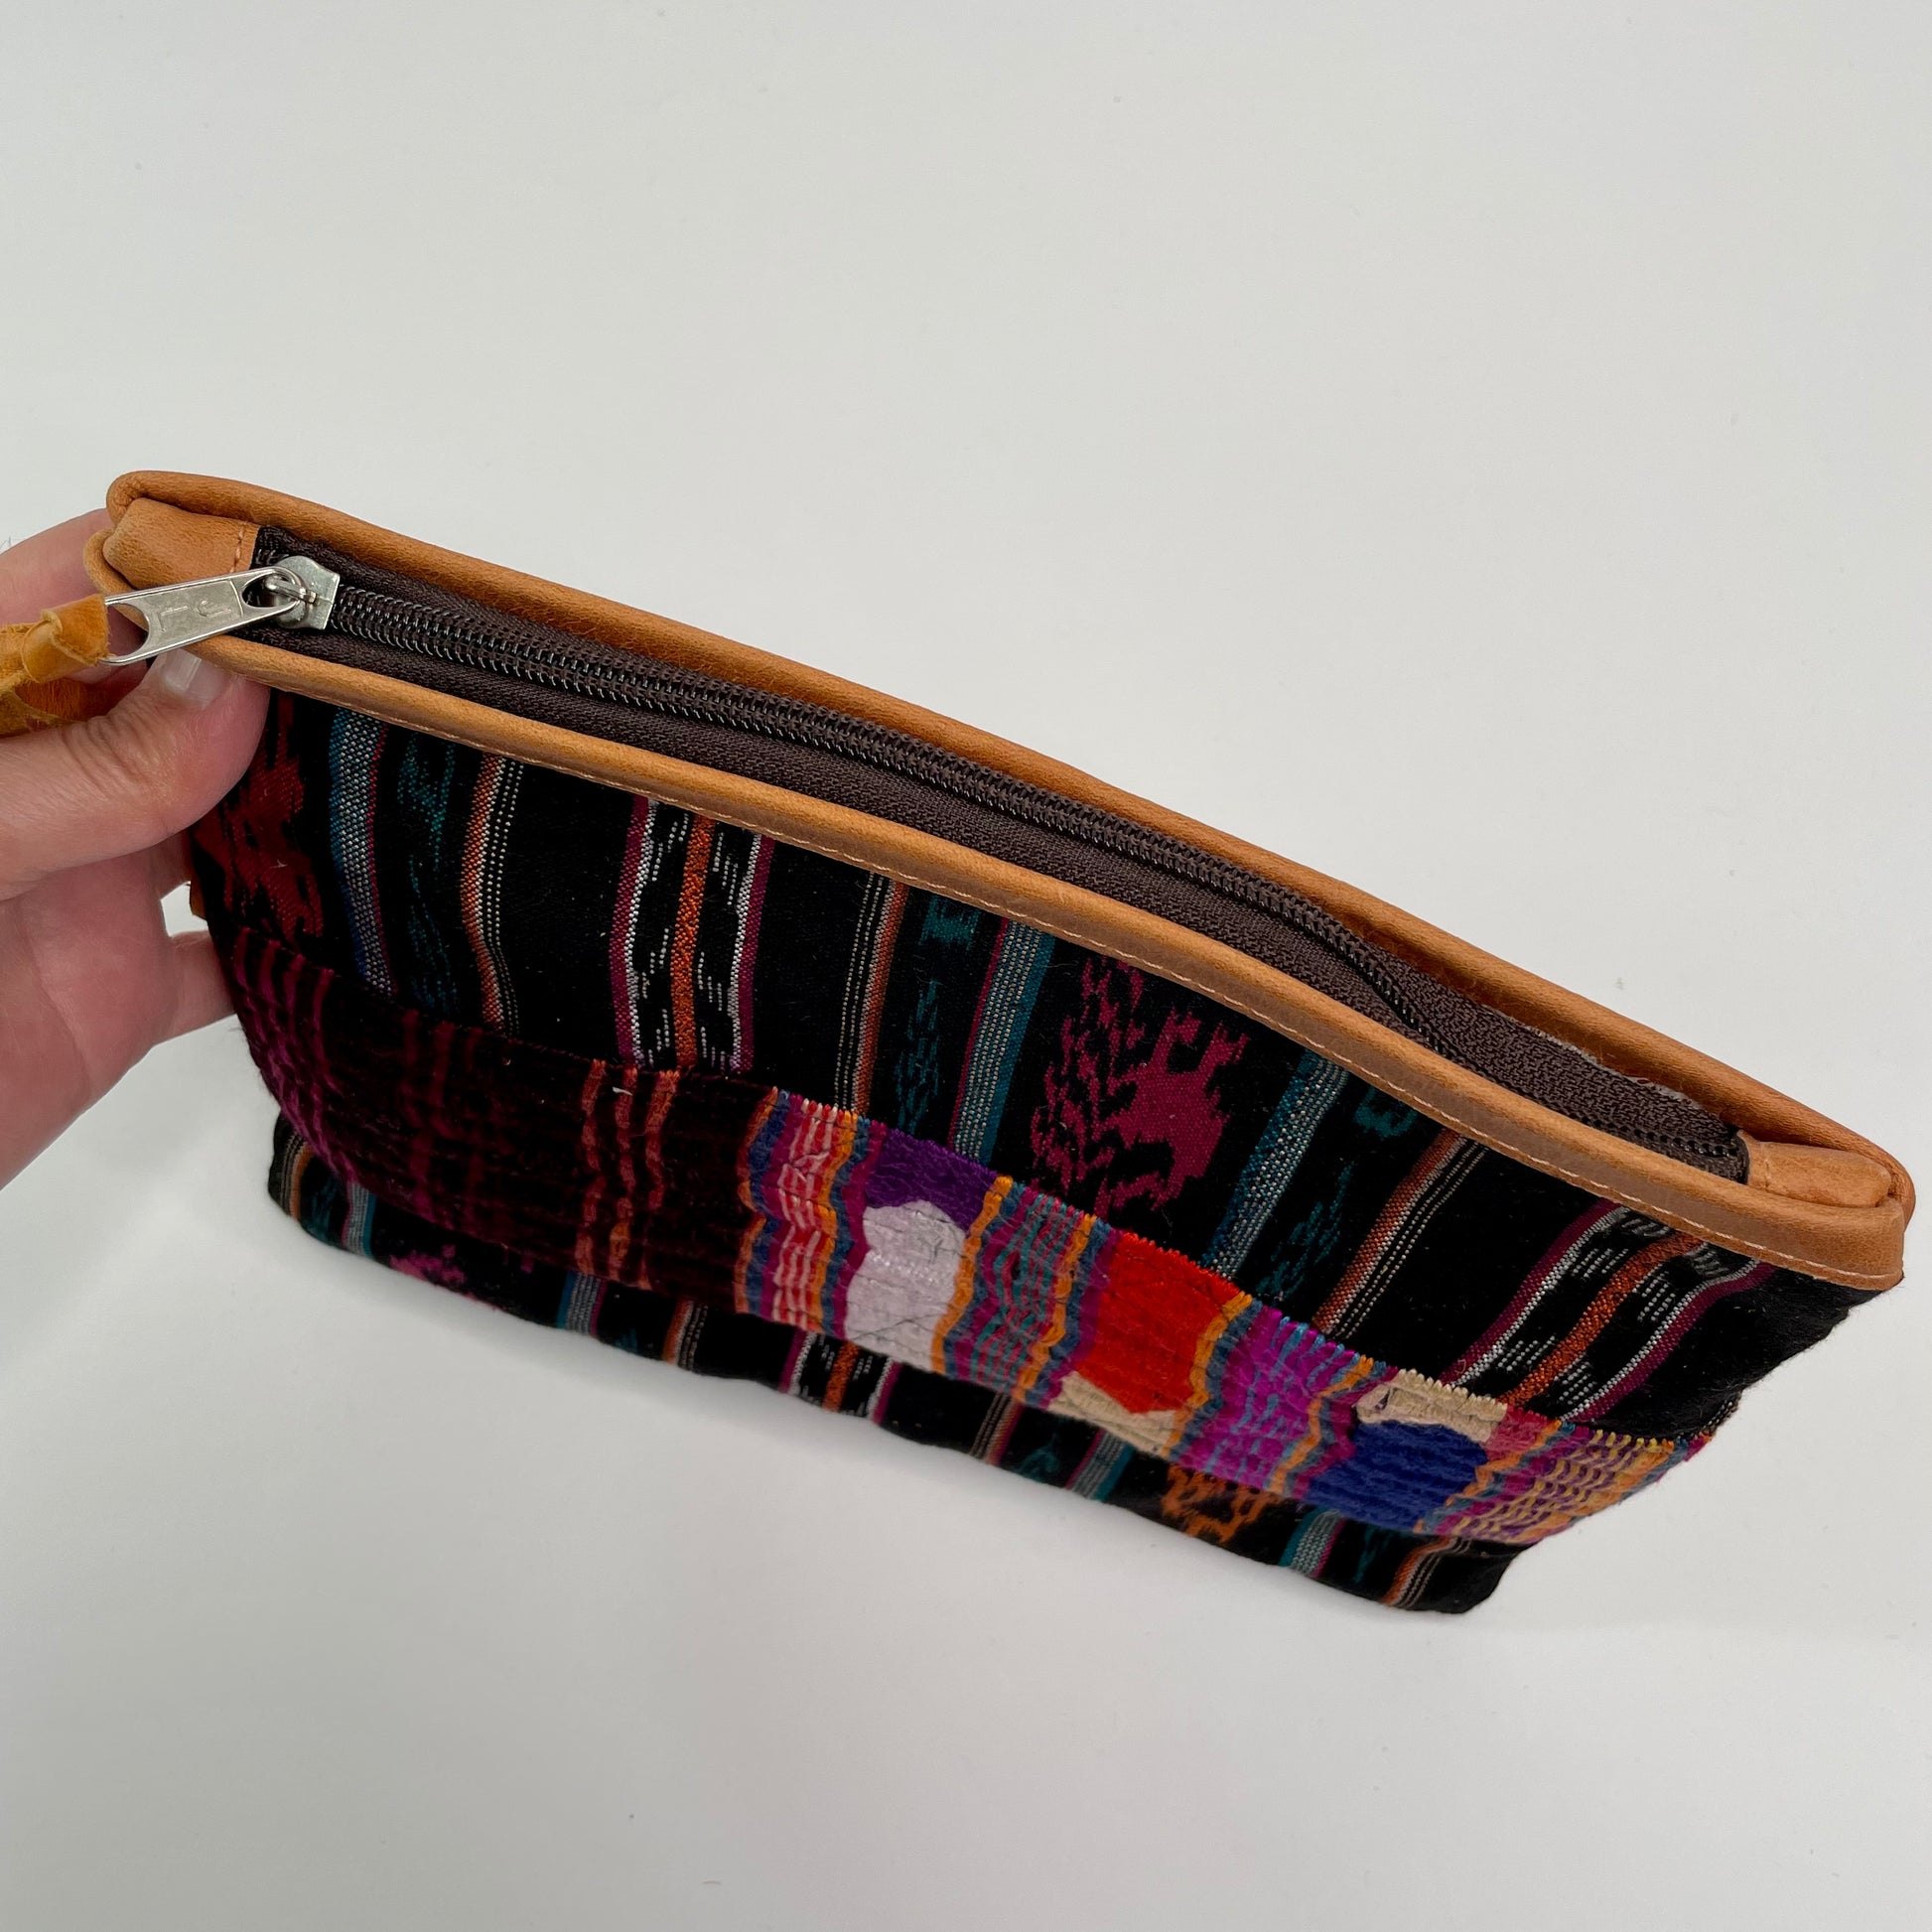 Embroidered Corte Clutch with Leather Trim crafted by hand from repurposed Mayan fabrics.